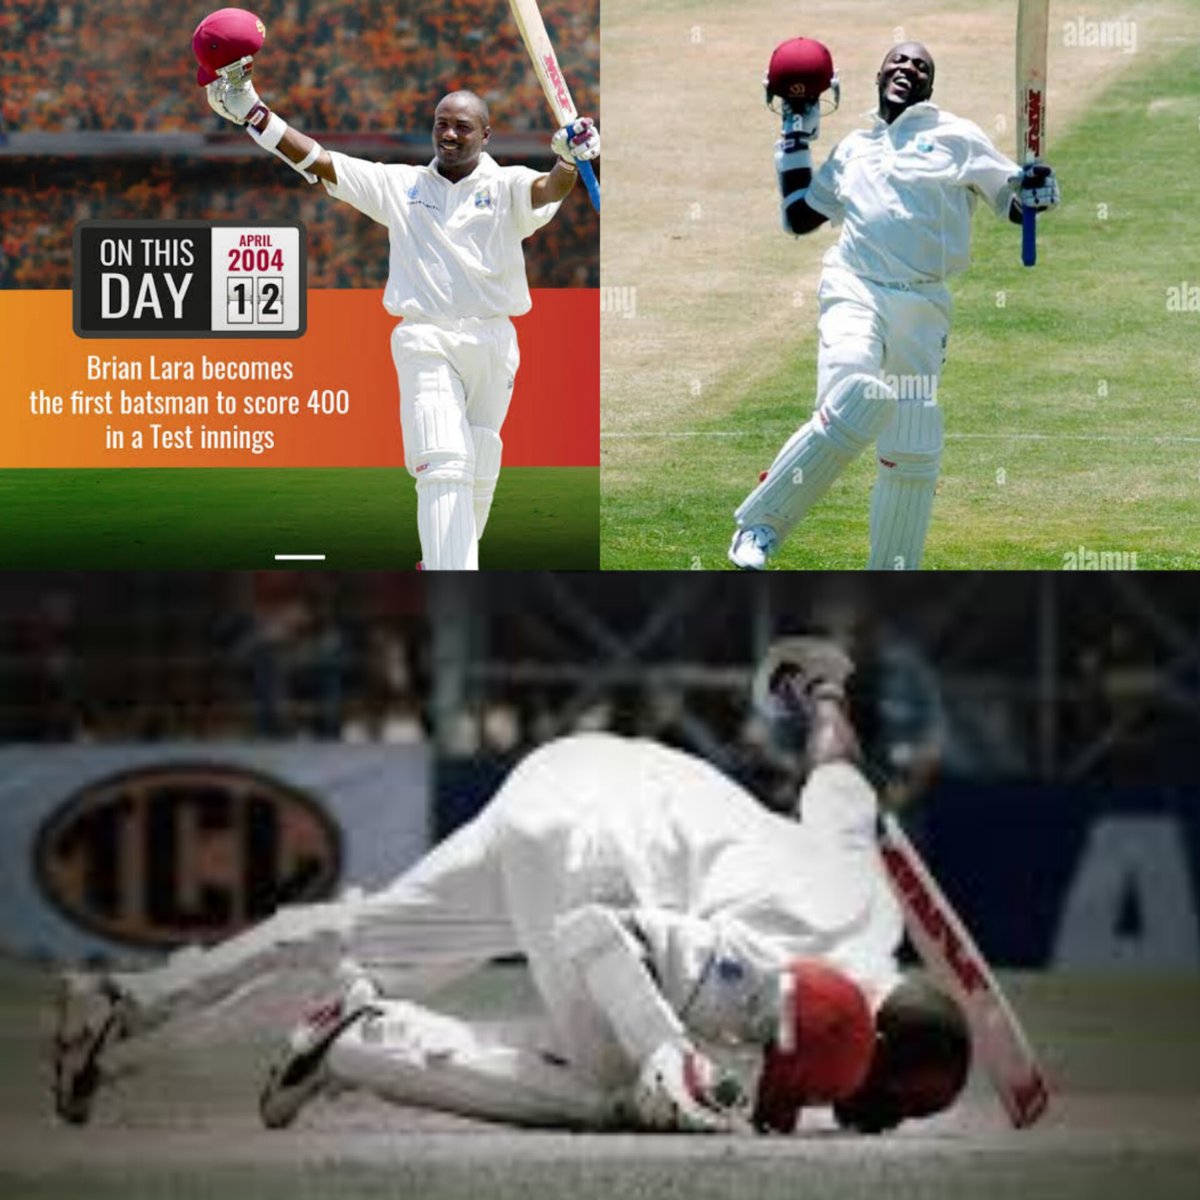 April 12 marks a historic moment in cricket as Brian Lara smashed a record-breaking 400 runs in a single Test innings against England in 2004. A legendary feat that will forever shine in cricket history! 🏏🔥 #BrianLara #CricketHistory #LSGvDC #IPL2024